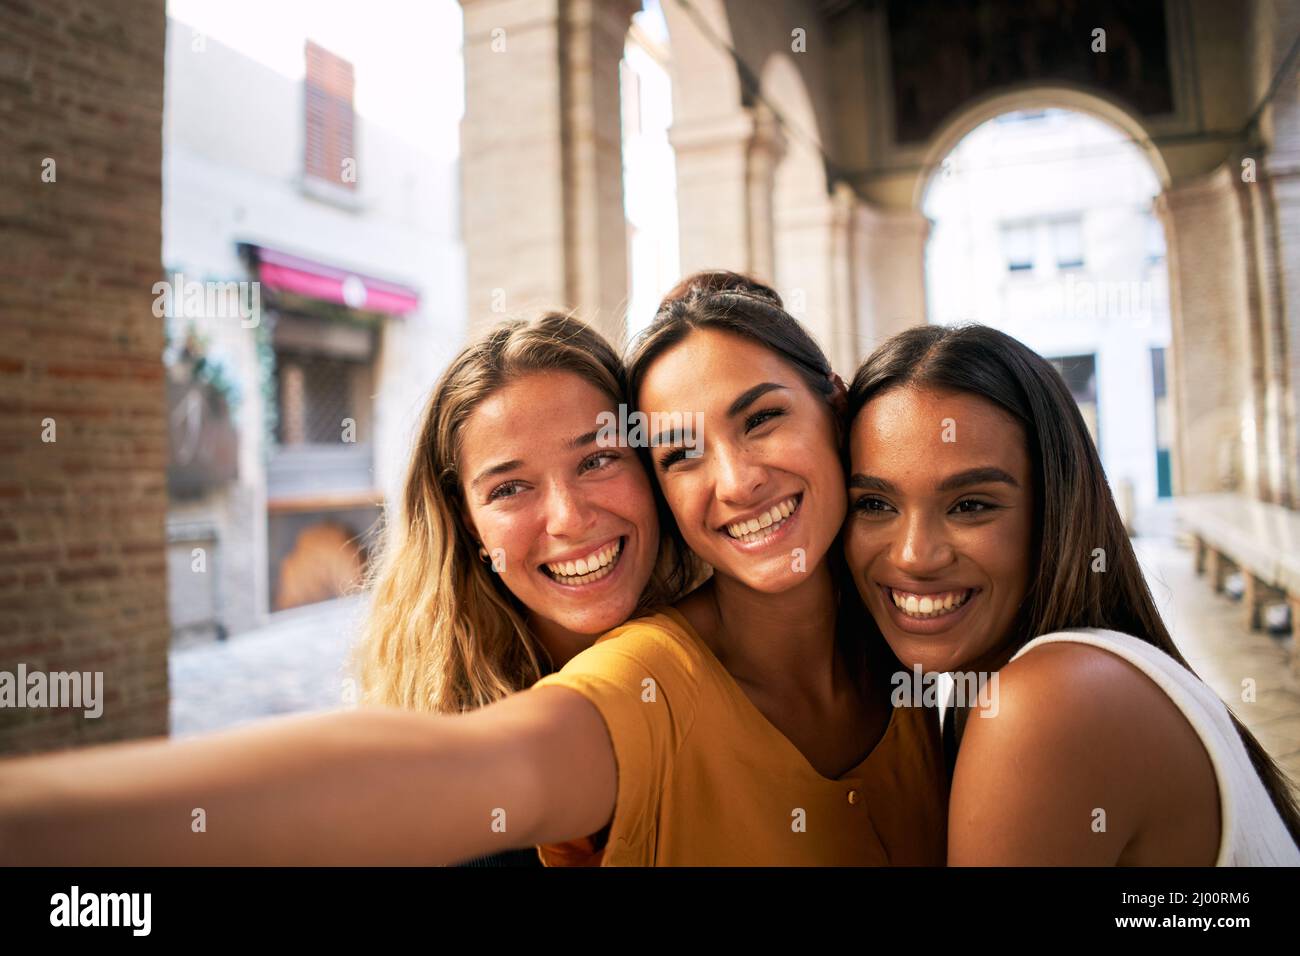 three happy female friends having fun together and taking smiling selfie Stock Photo